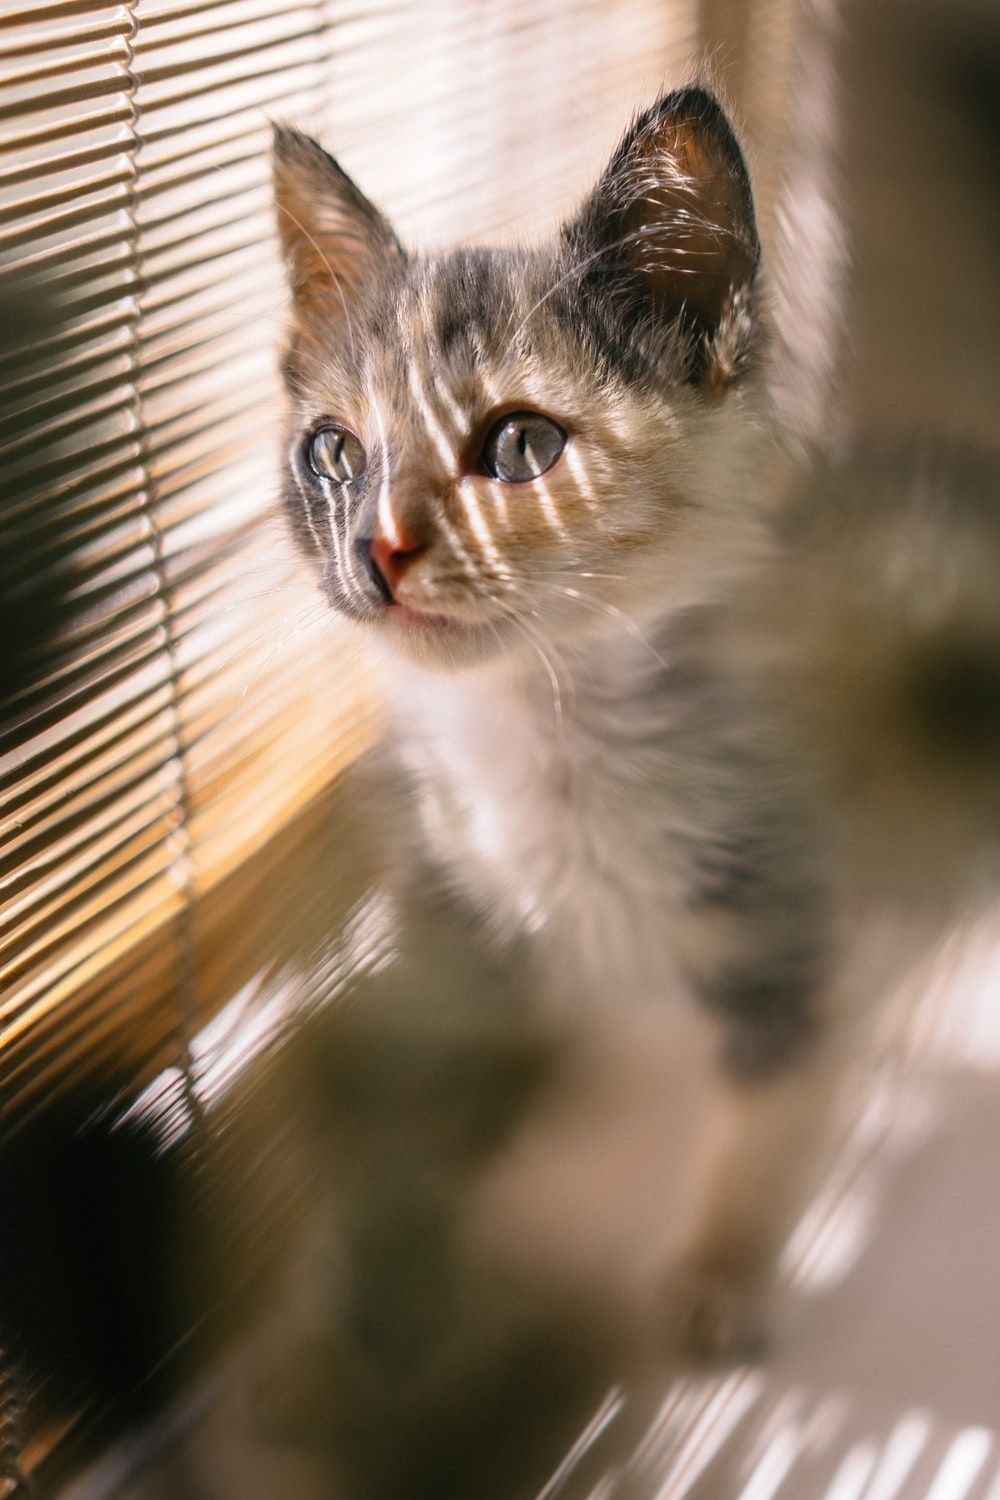 Cat Picture & Image [HD]. Download Free Image